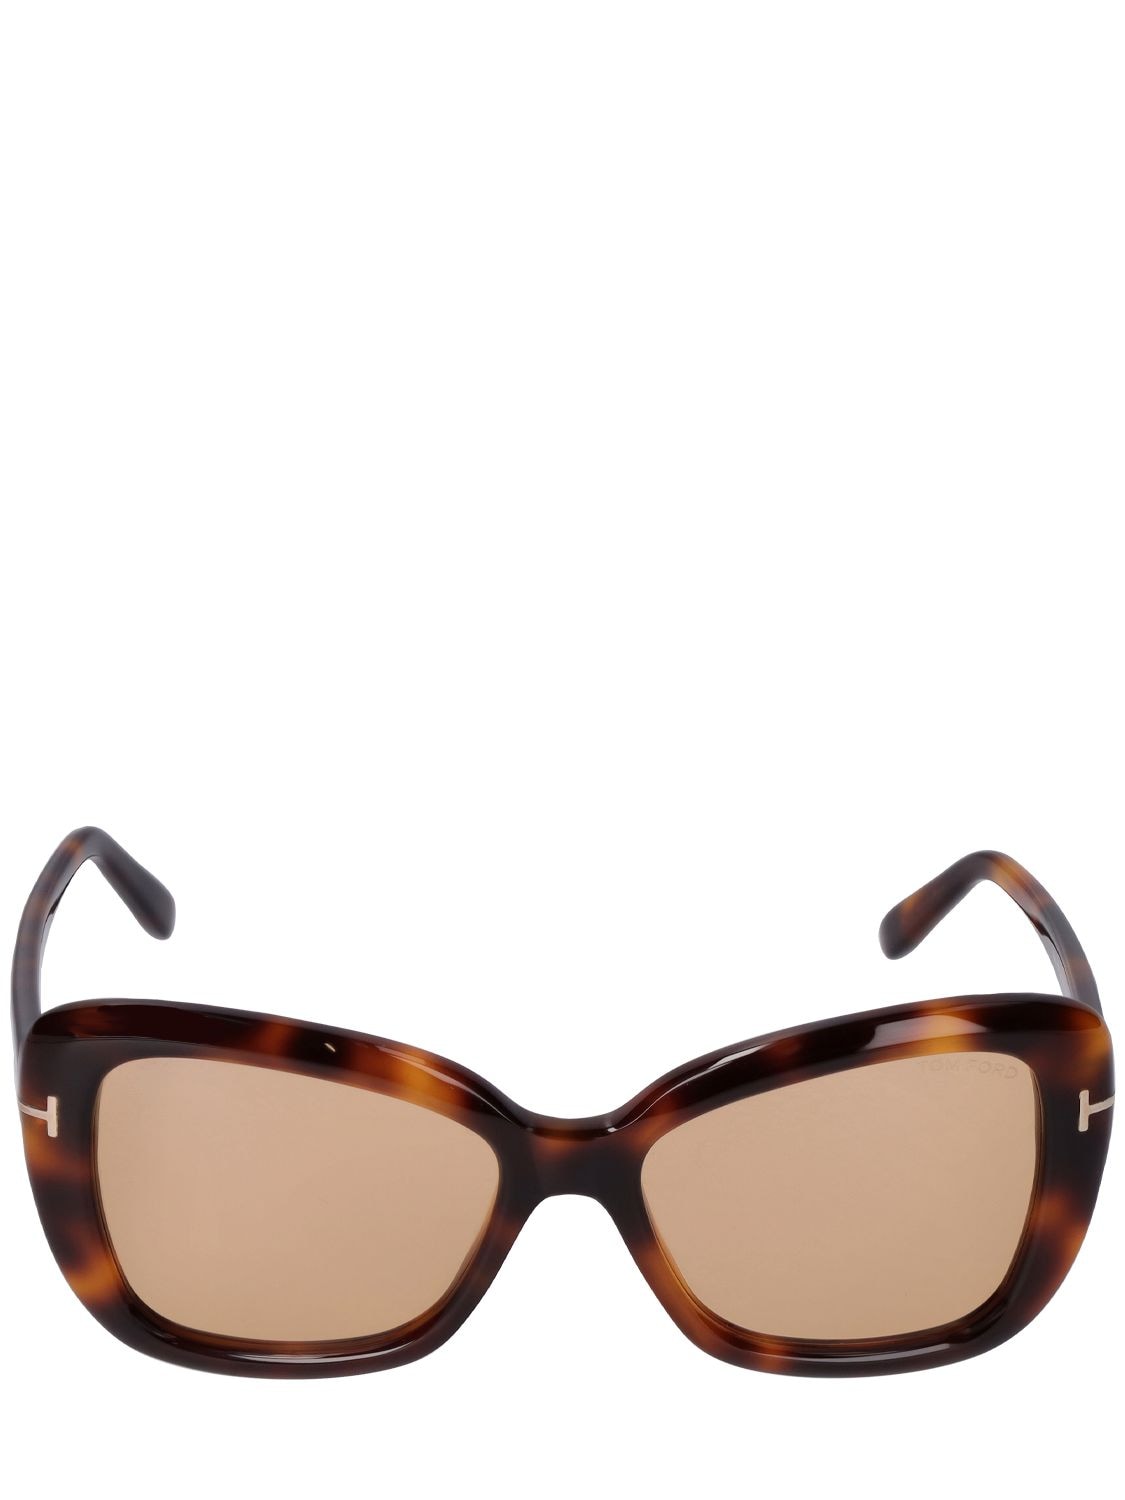 Tom Ford Maeve Butterfly Acetate Sunglasses In Havana,brown